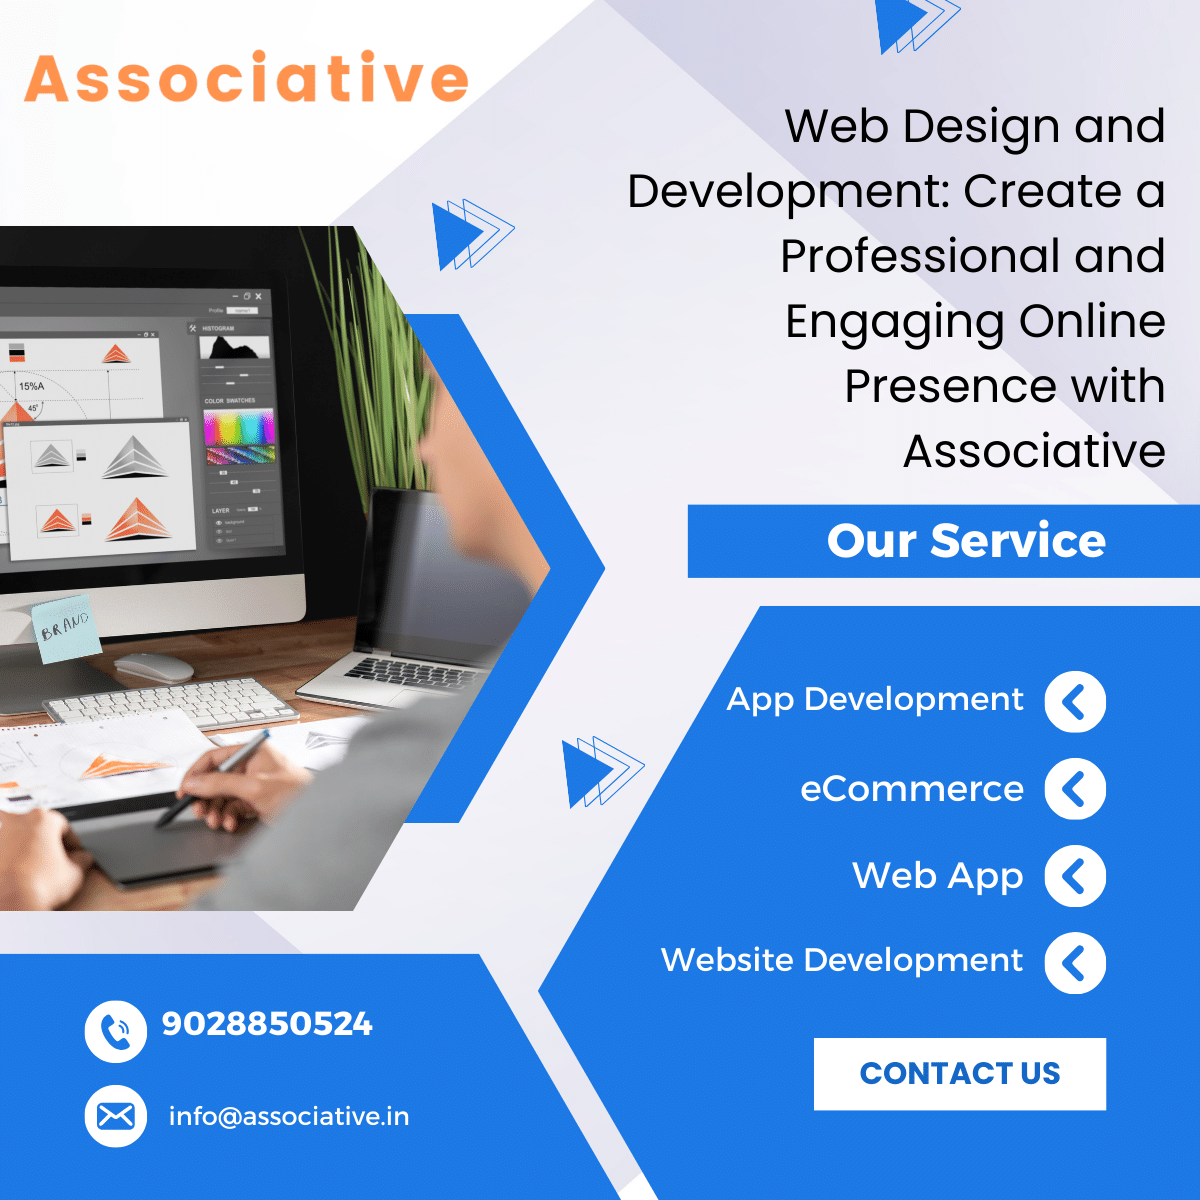 Web Design and Development: Create a Professional and Engaging Online Presence